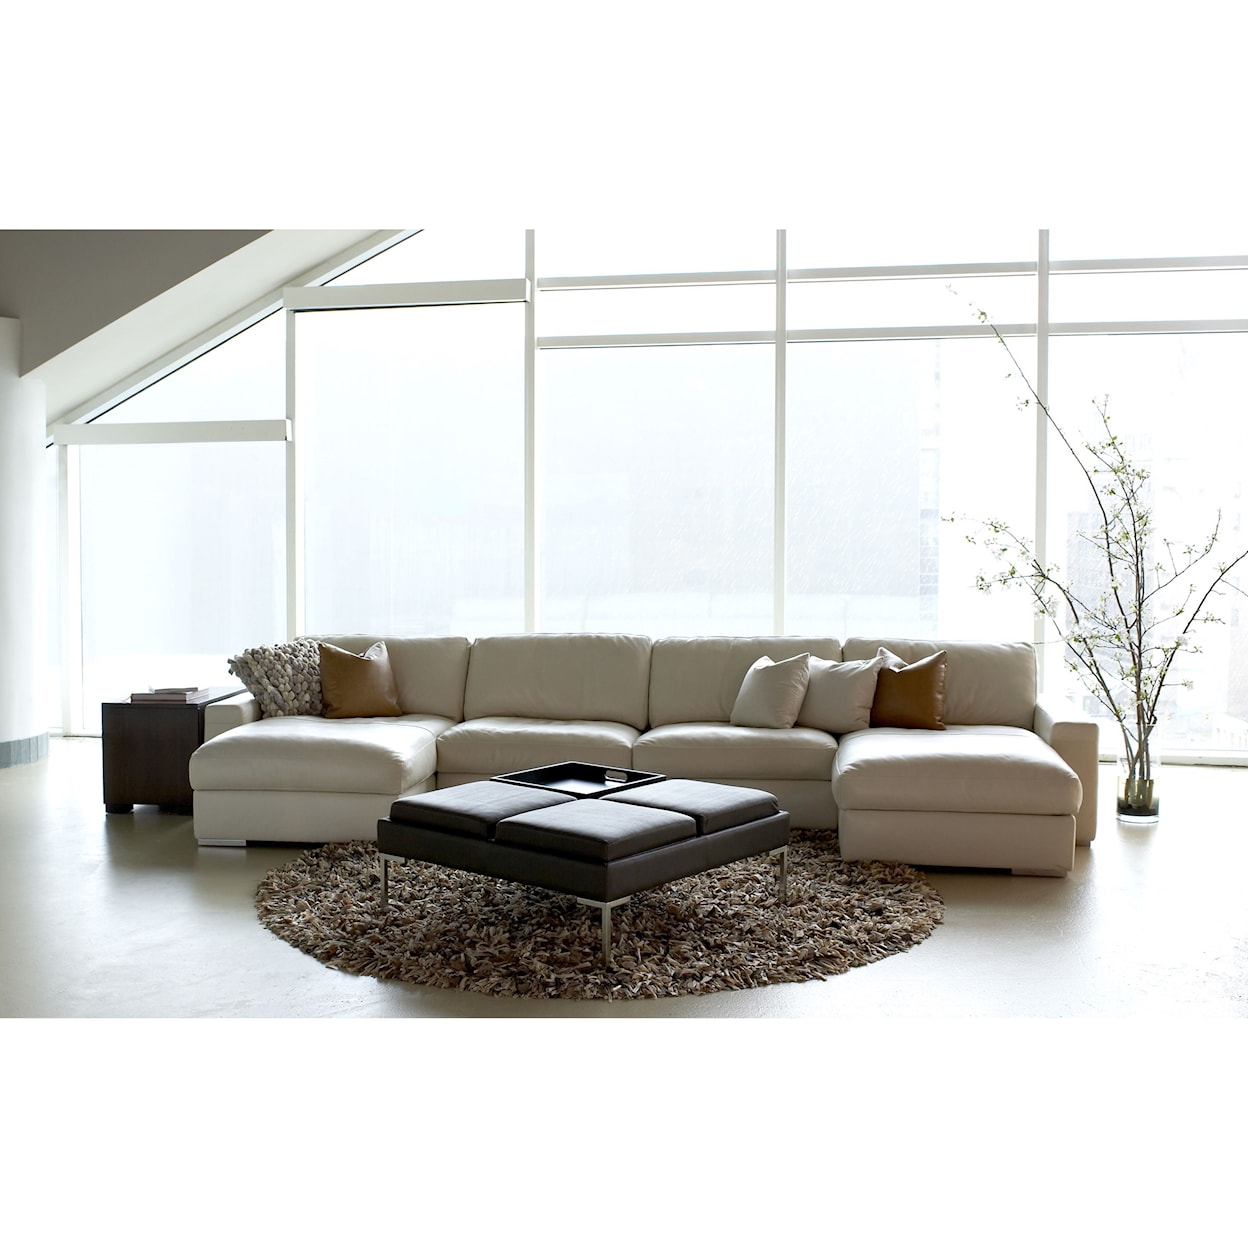 American Leather Westchester 3-Piece Sectional Sofa